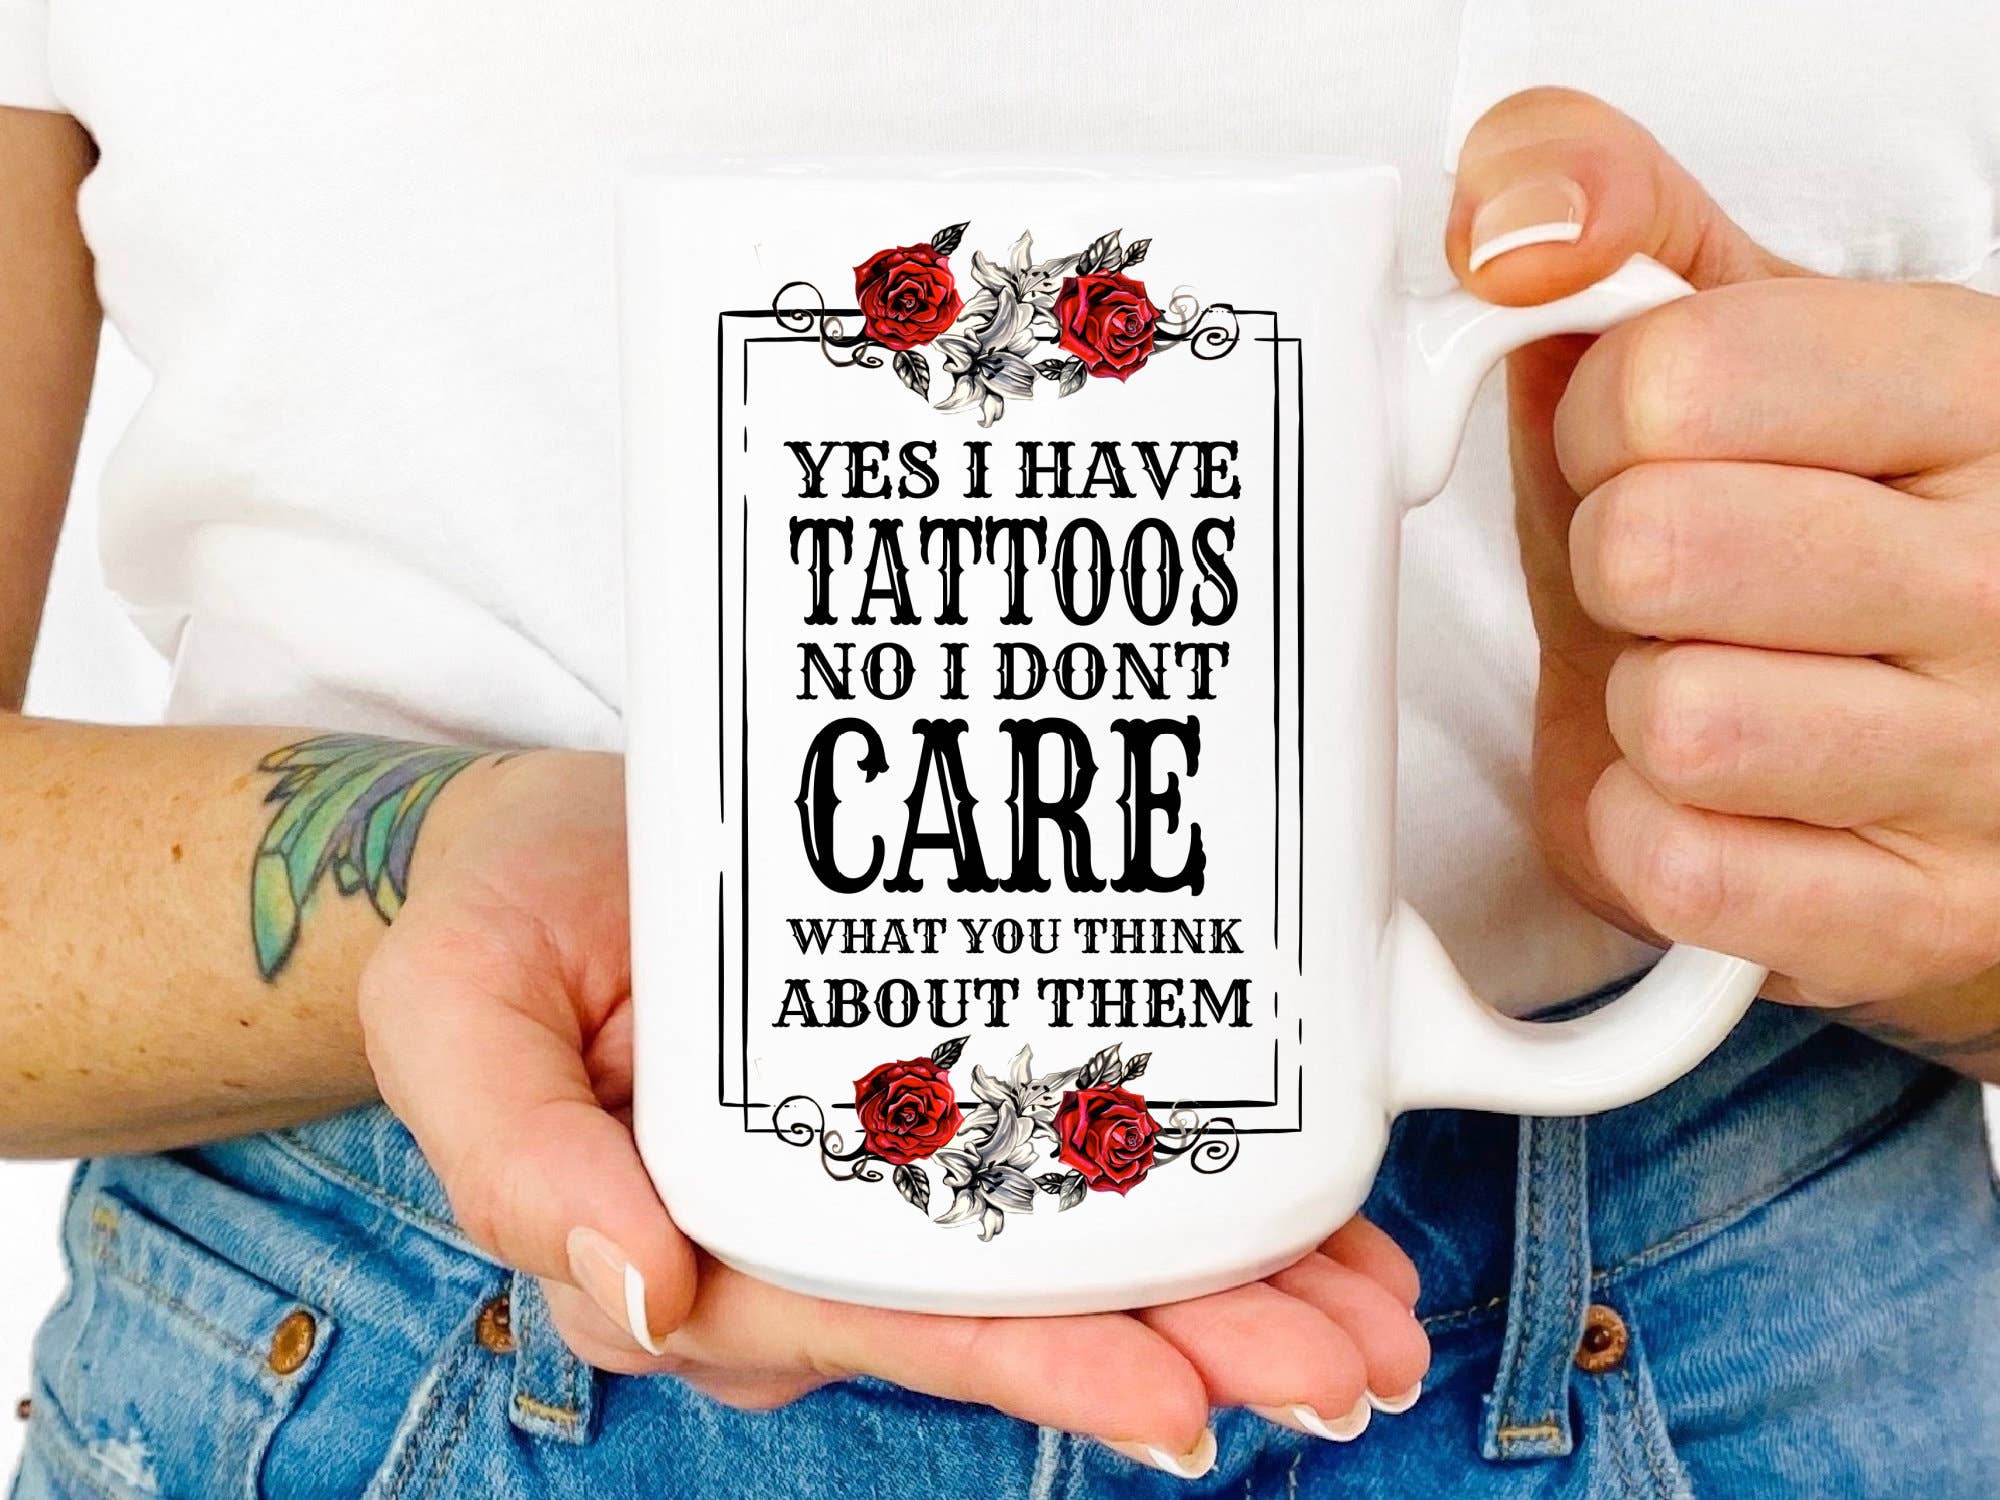 Tattoo Lovers Care